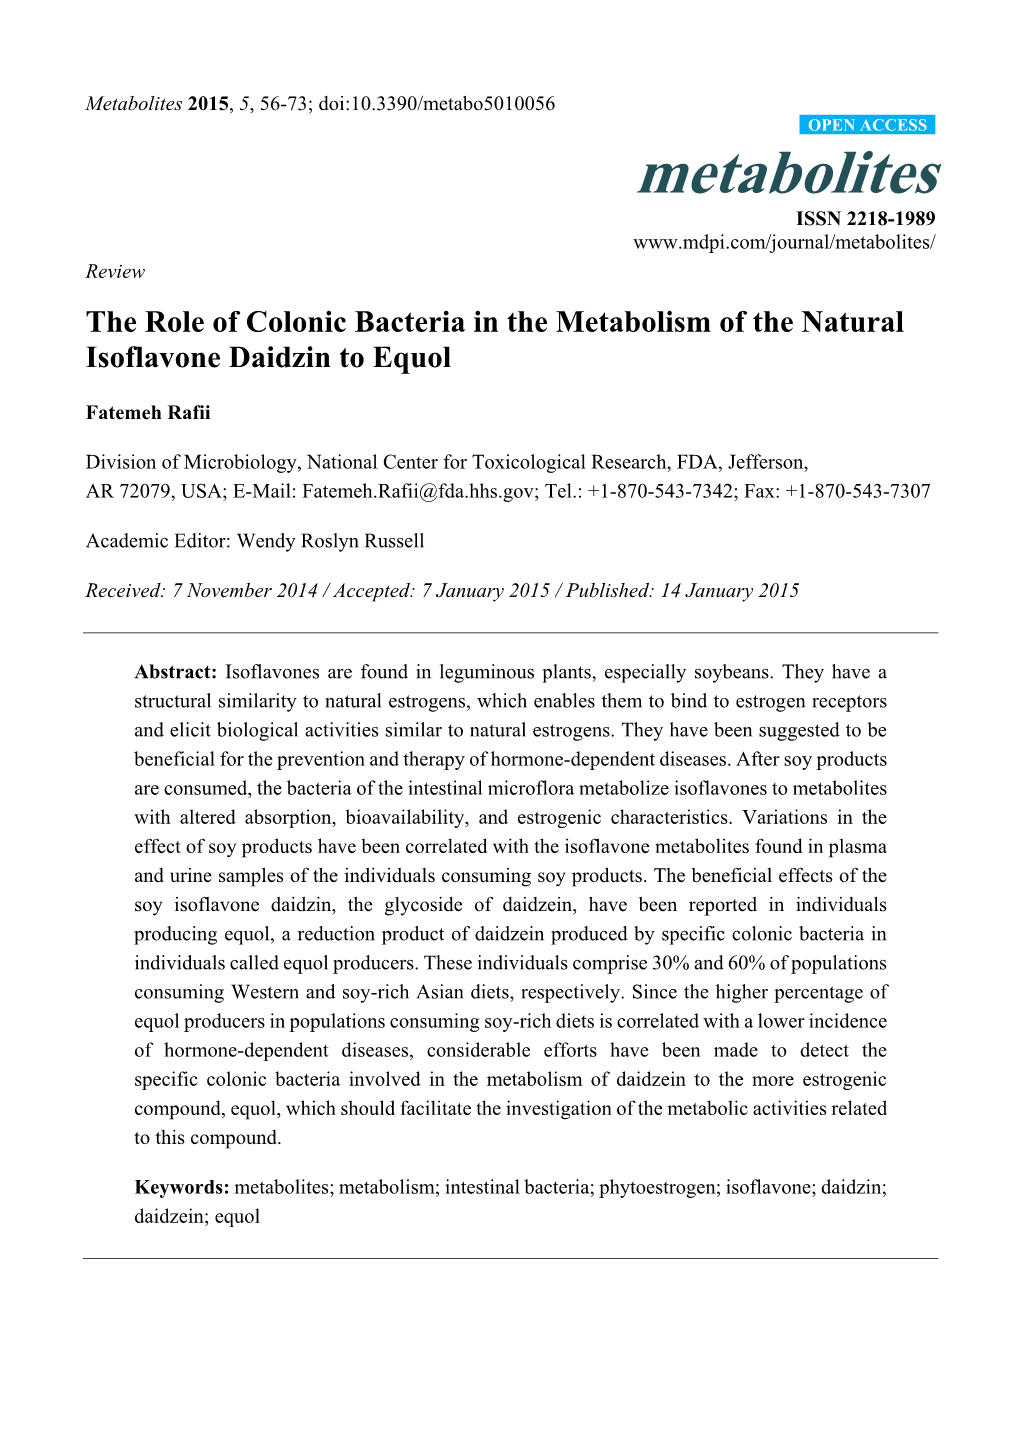 The Role of Colonic Bacteria in the Metabolism of the Natural Isoflavone Daidzin to Equol